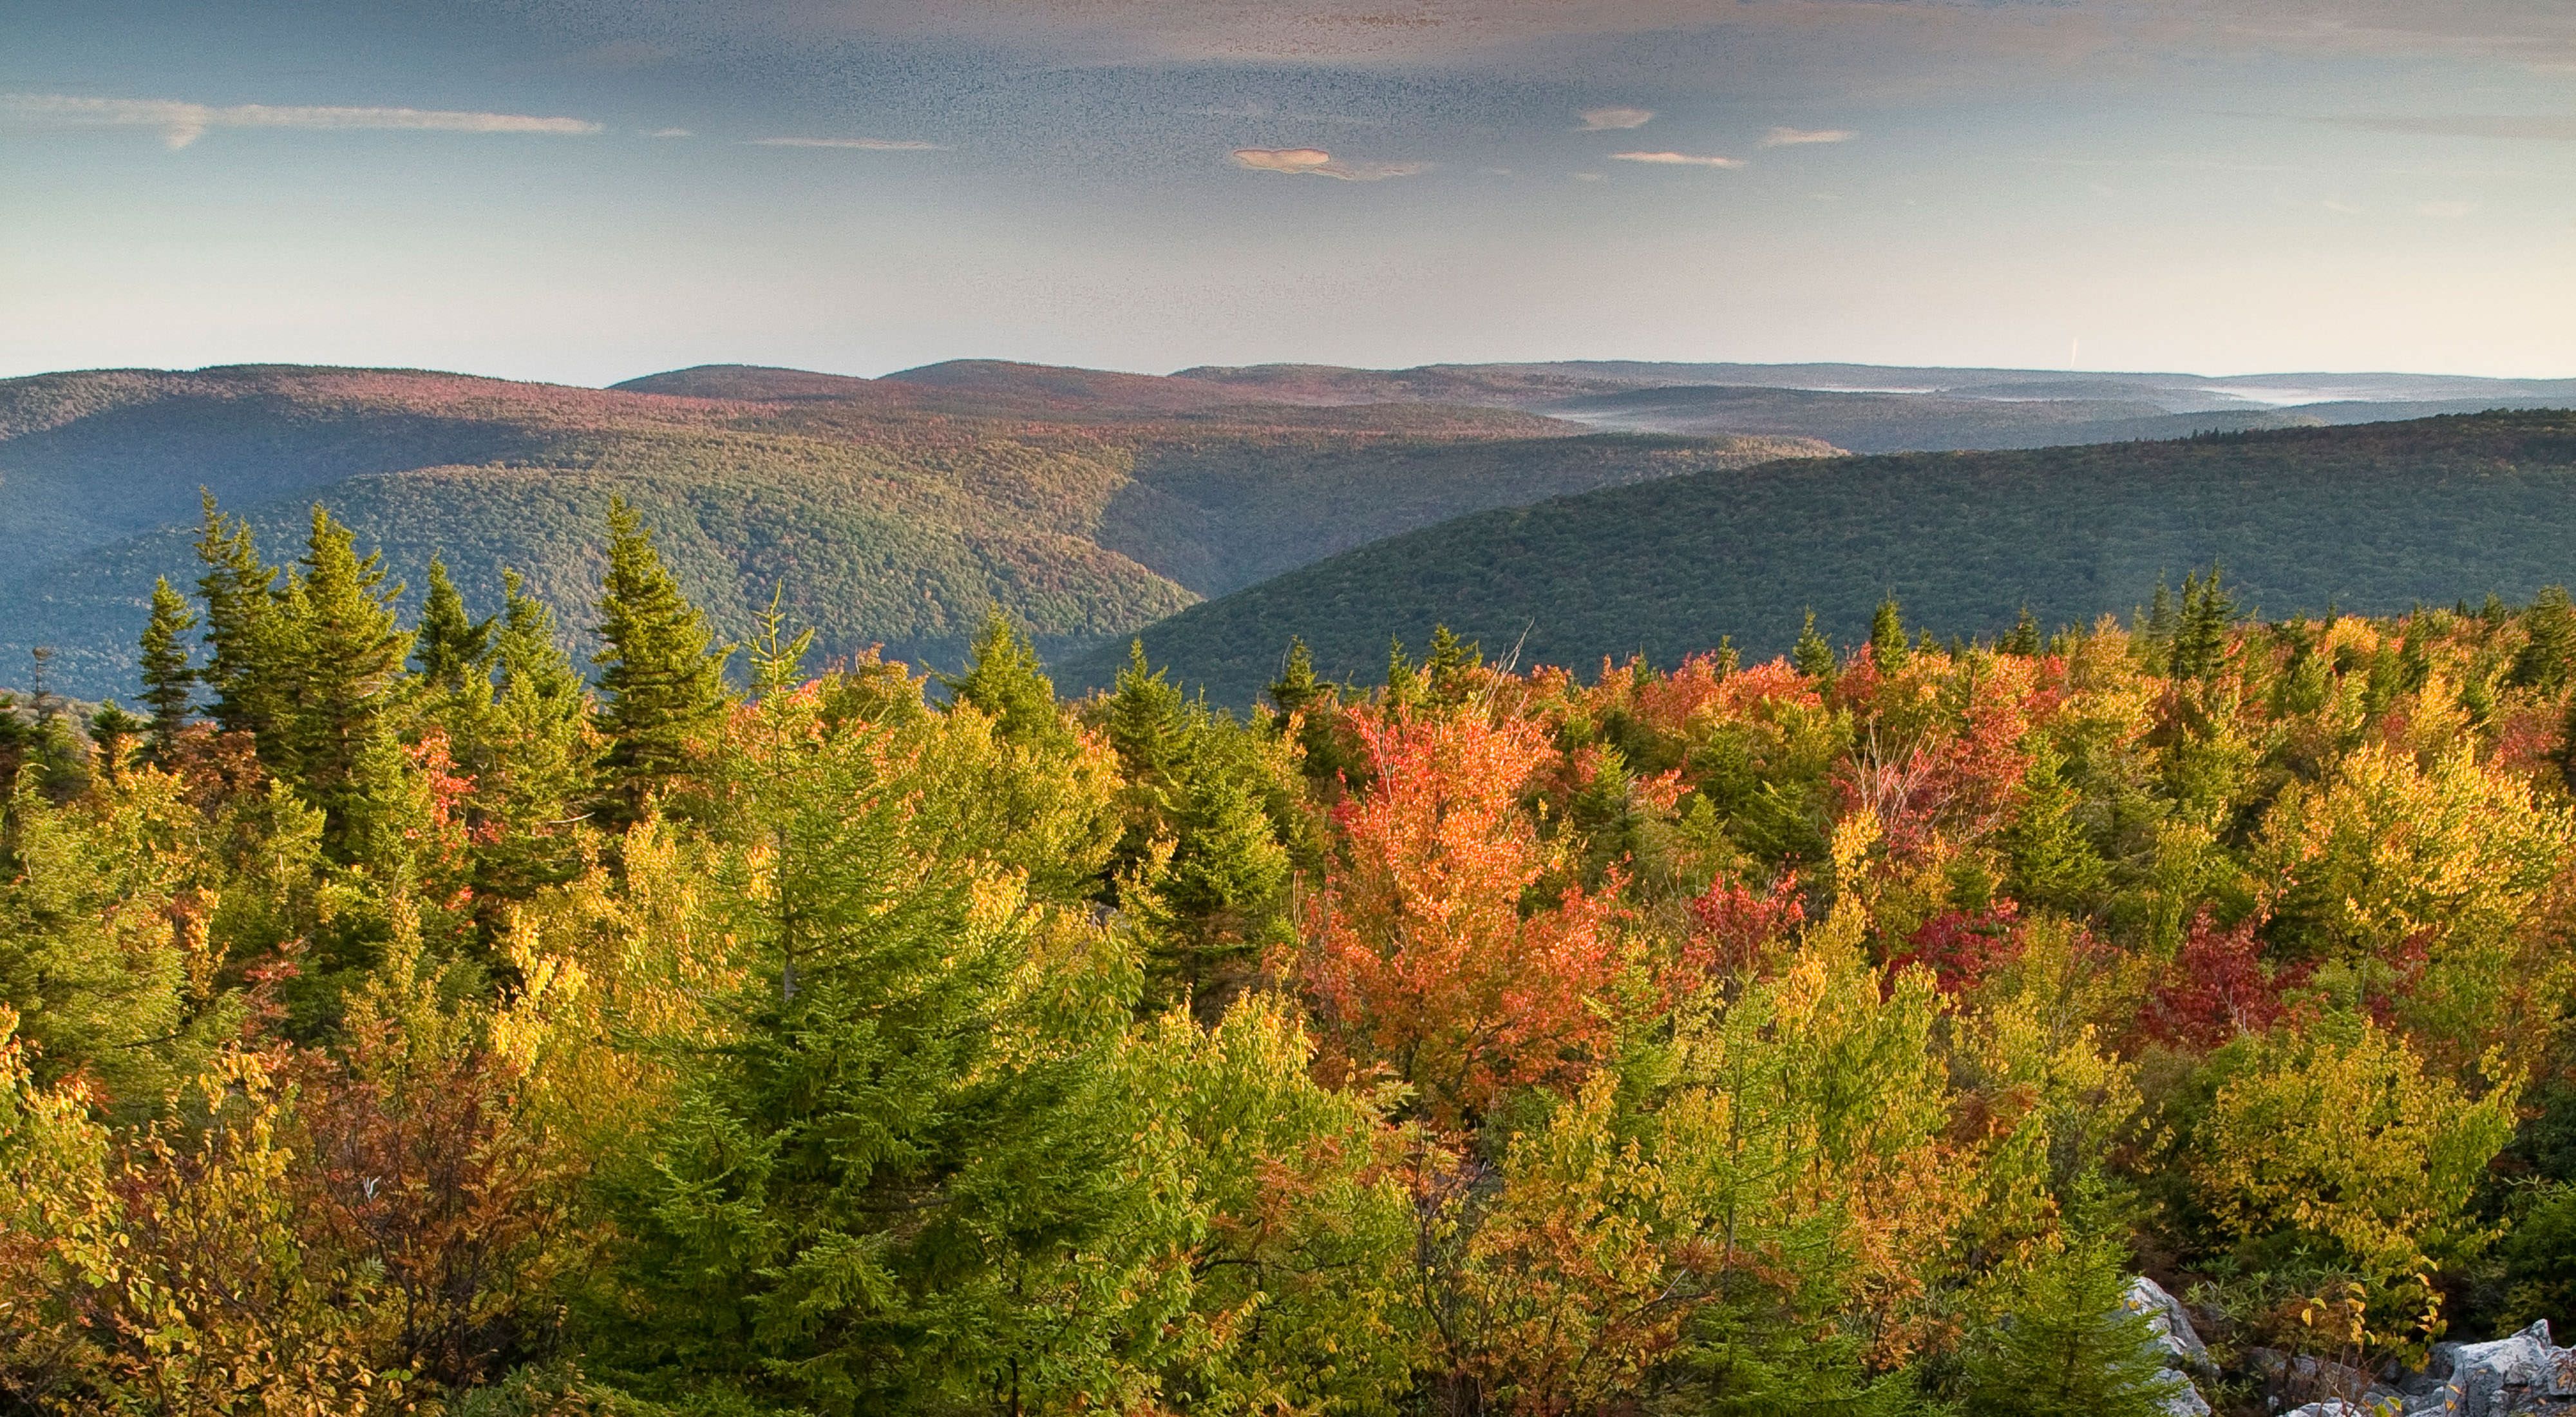 Looking out over rolling mountain ridges that extend to the horizon. Tree tops visible in the foreground show autumn colors of red and gold.